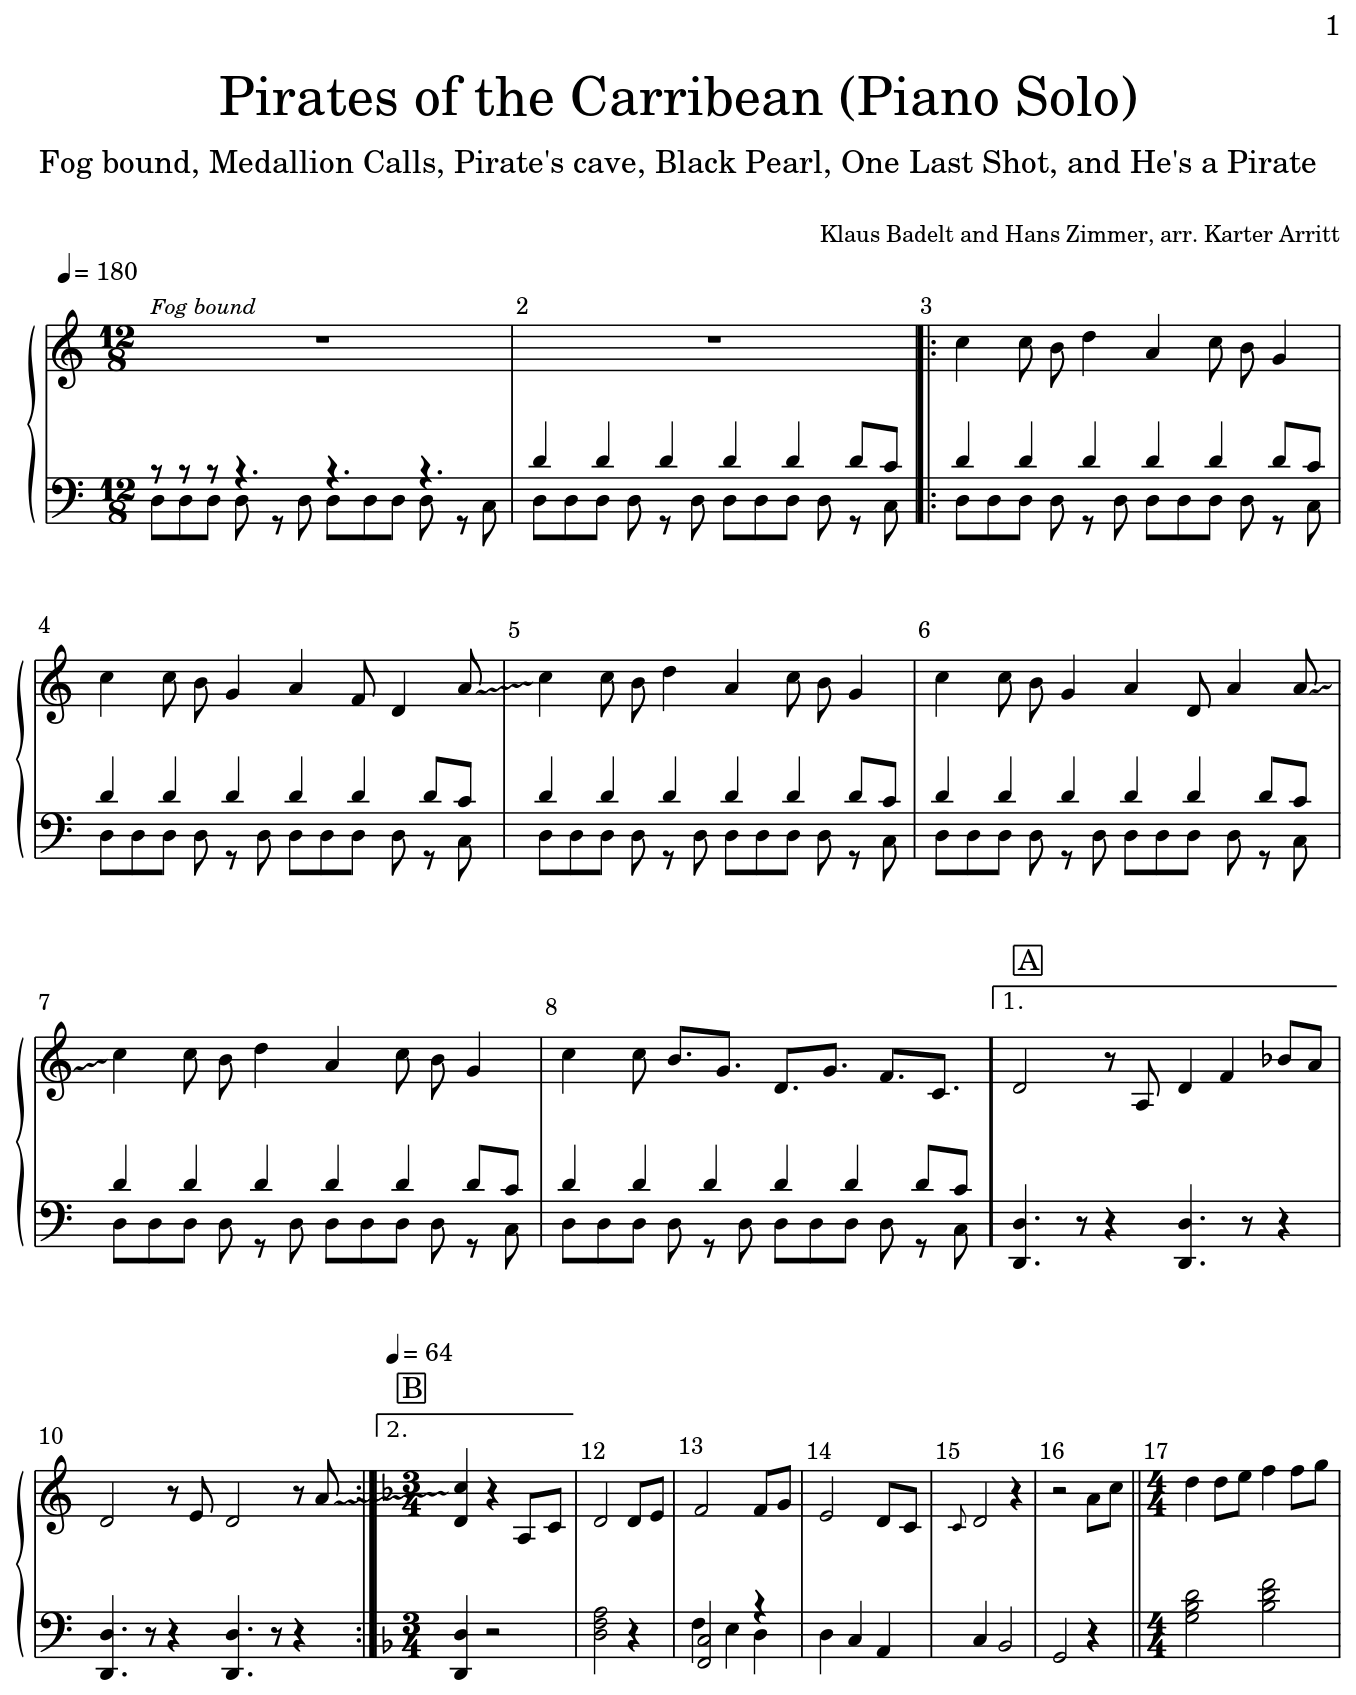 pirates-of-the-carribean-piano-solo-sheet-music-for-piano